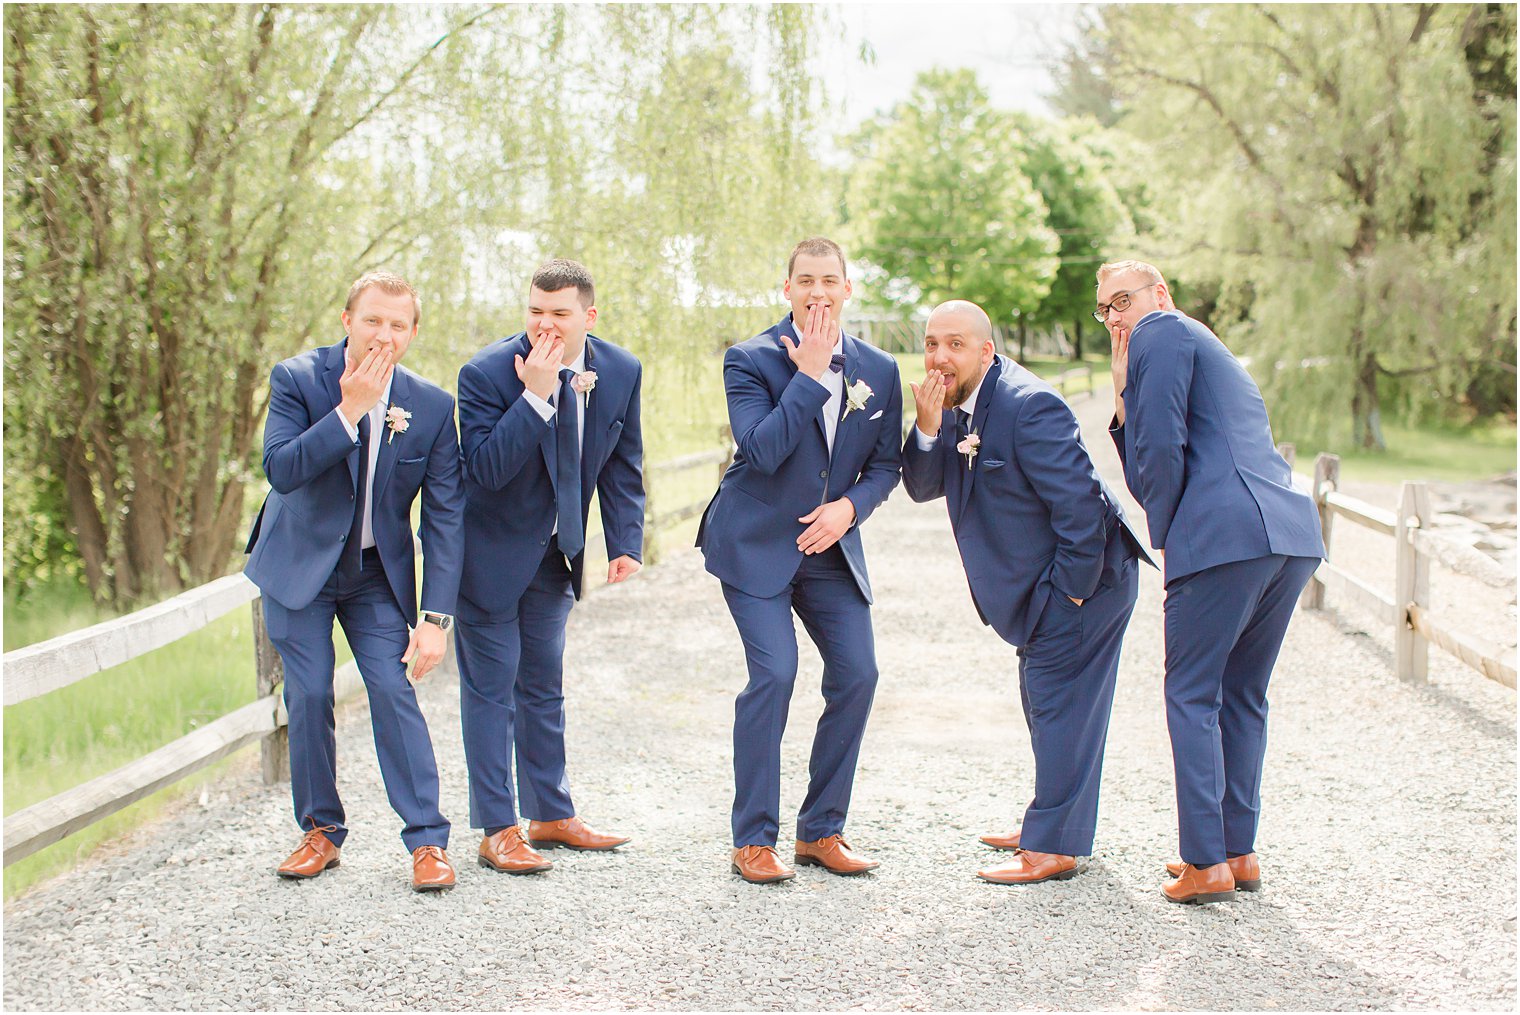 Silly groomsmen photo at Windows on the Water at Frogbridge